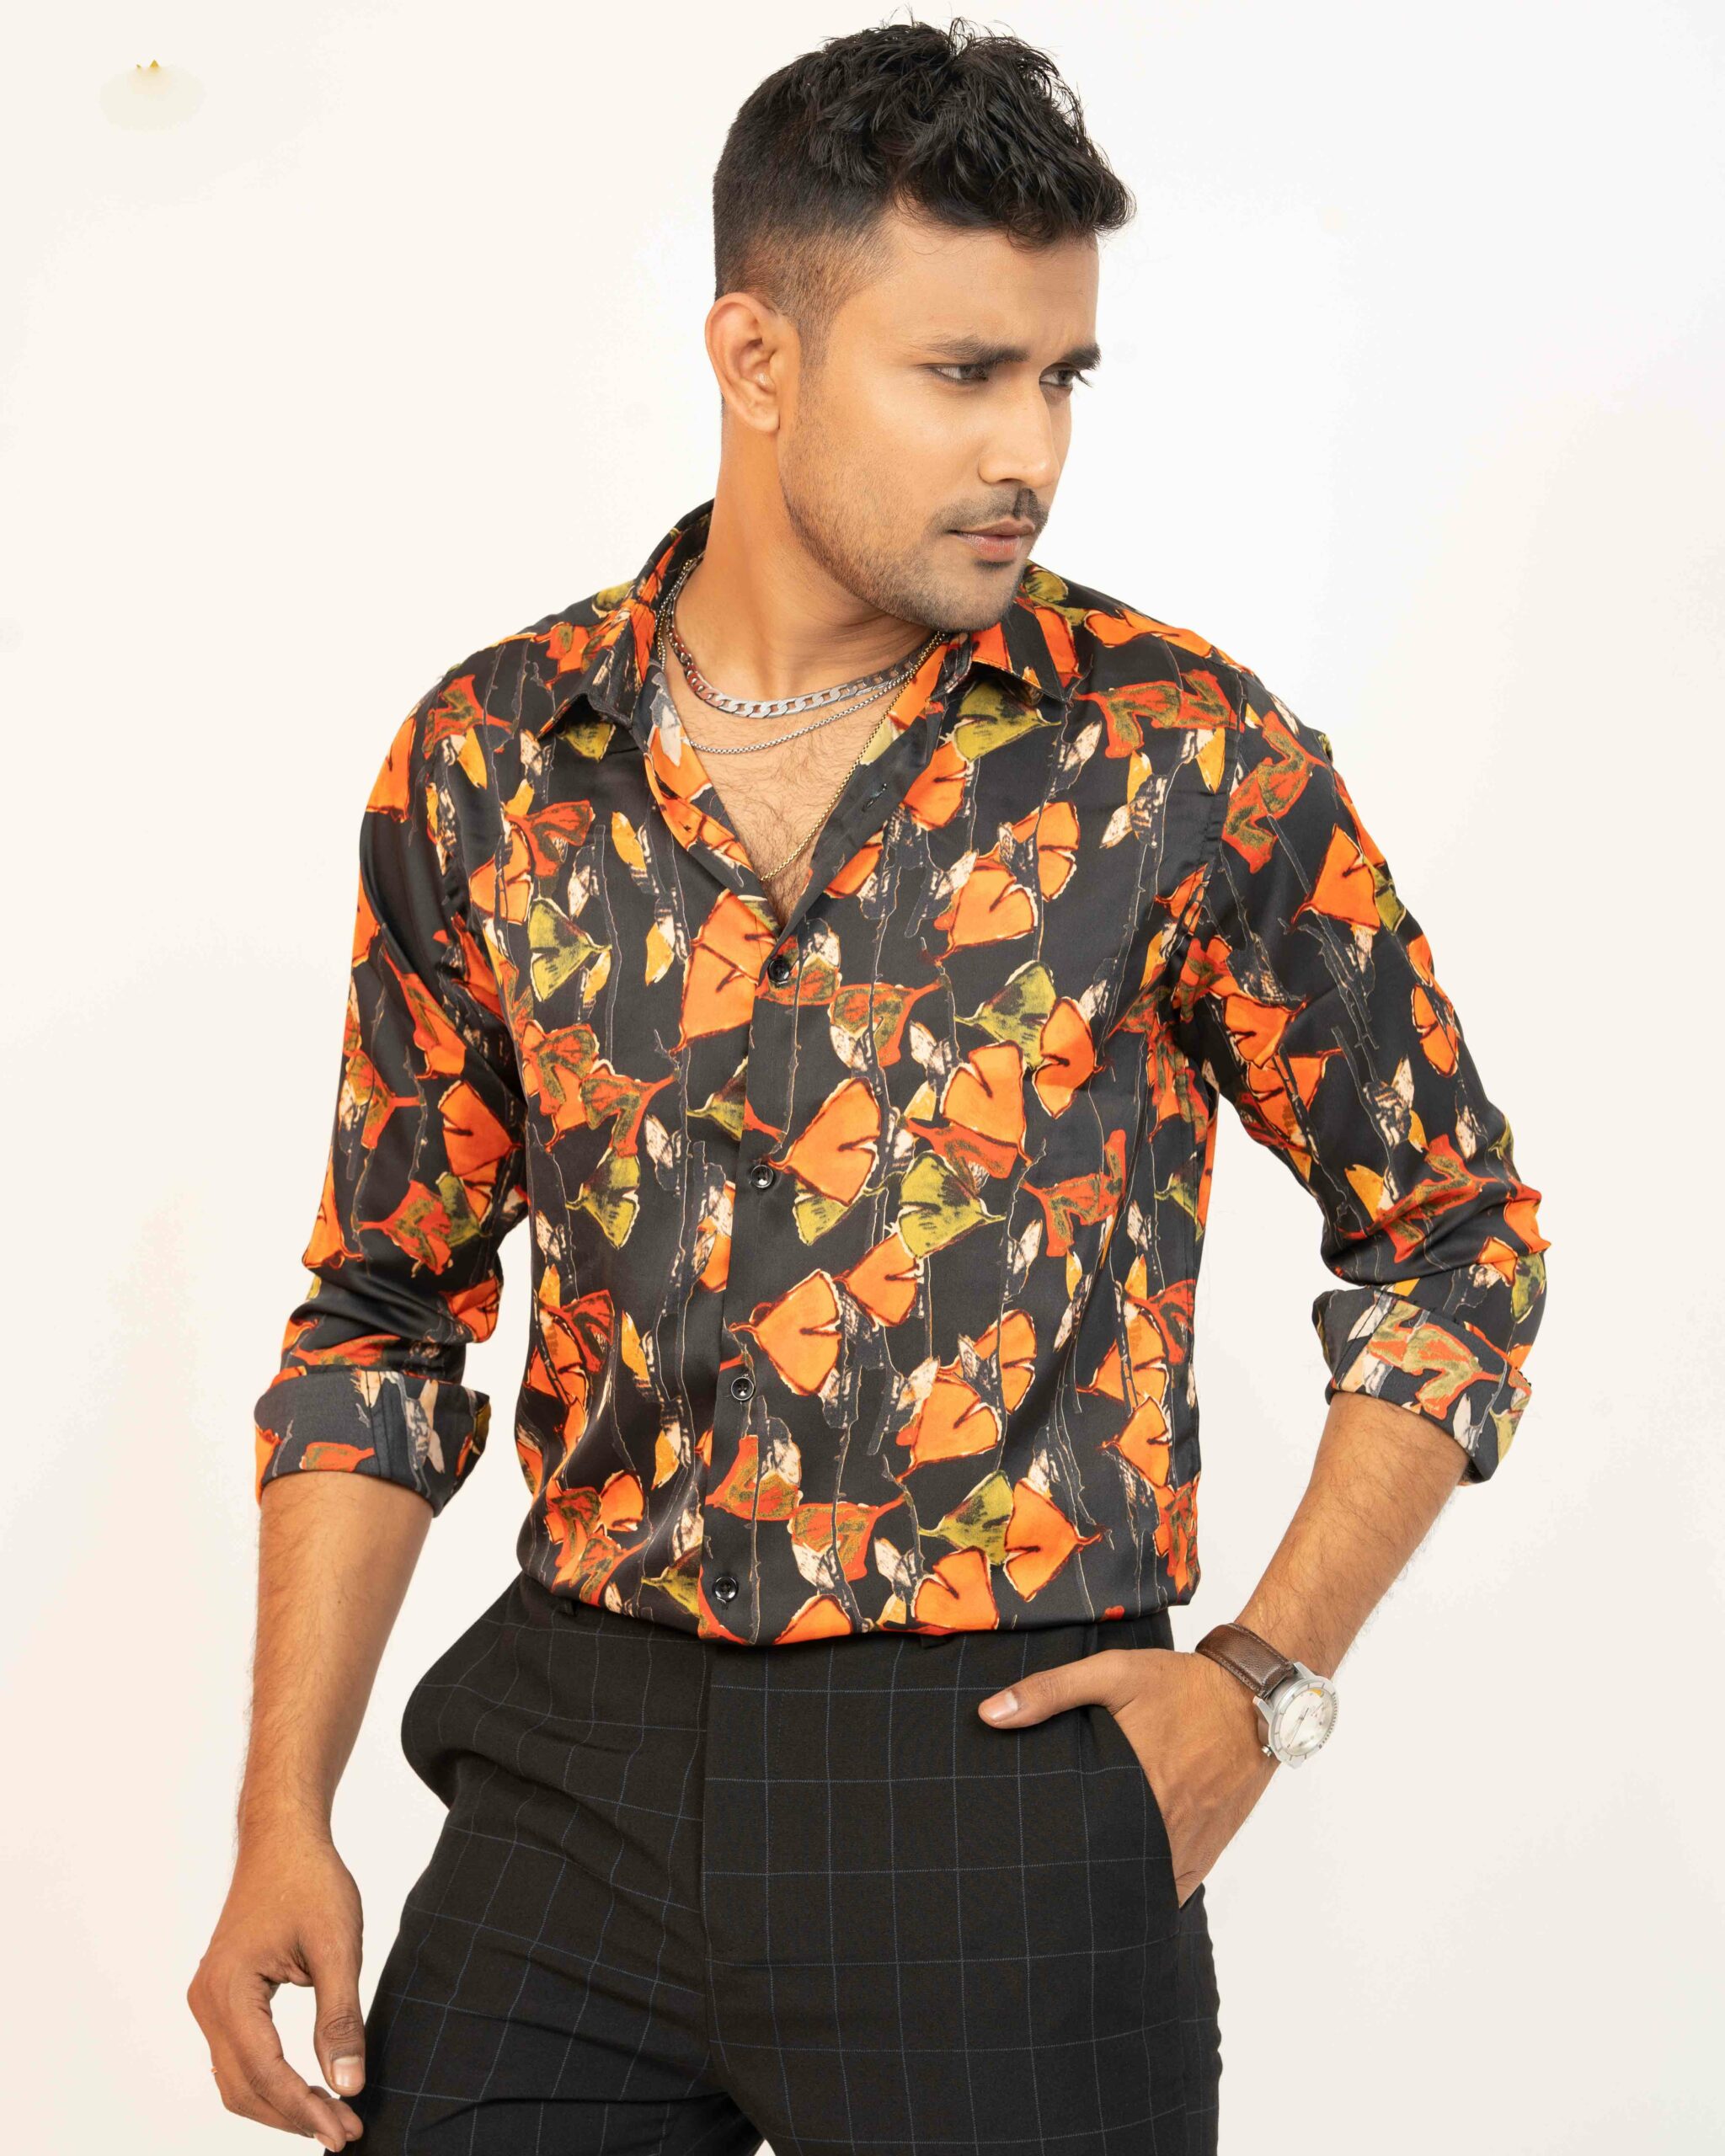 Men's Imported Party Shirt